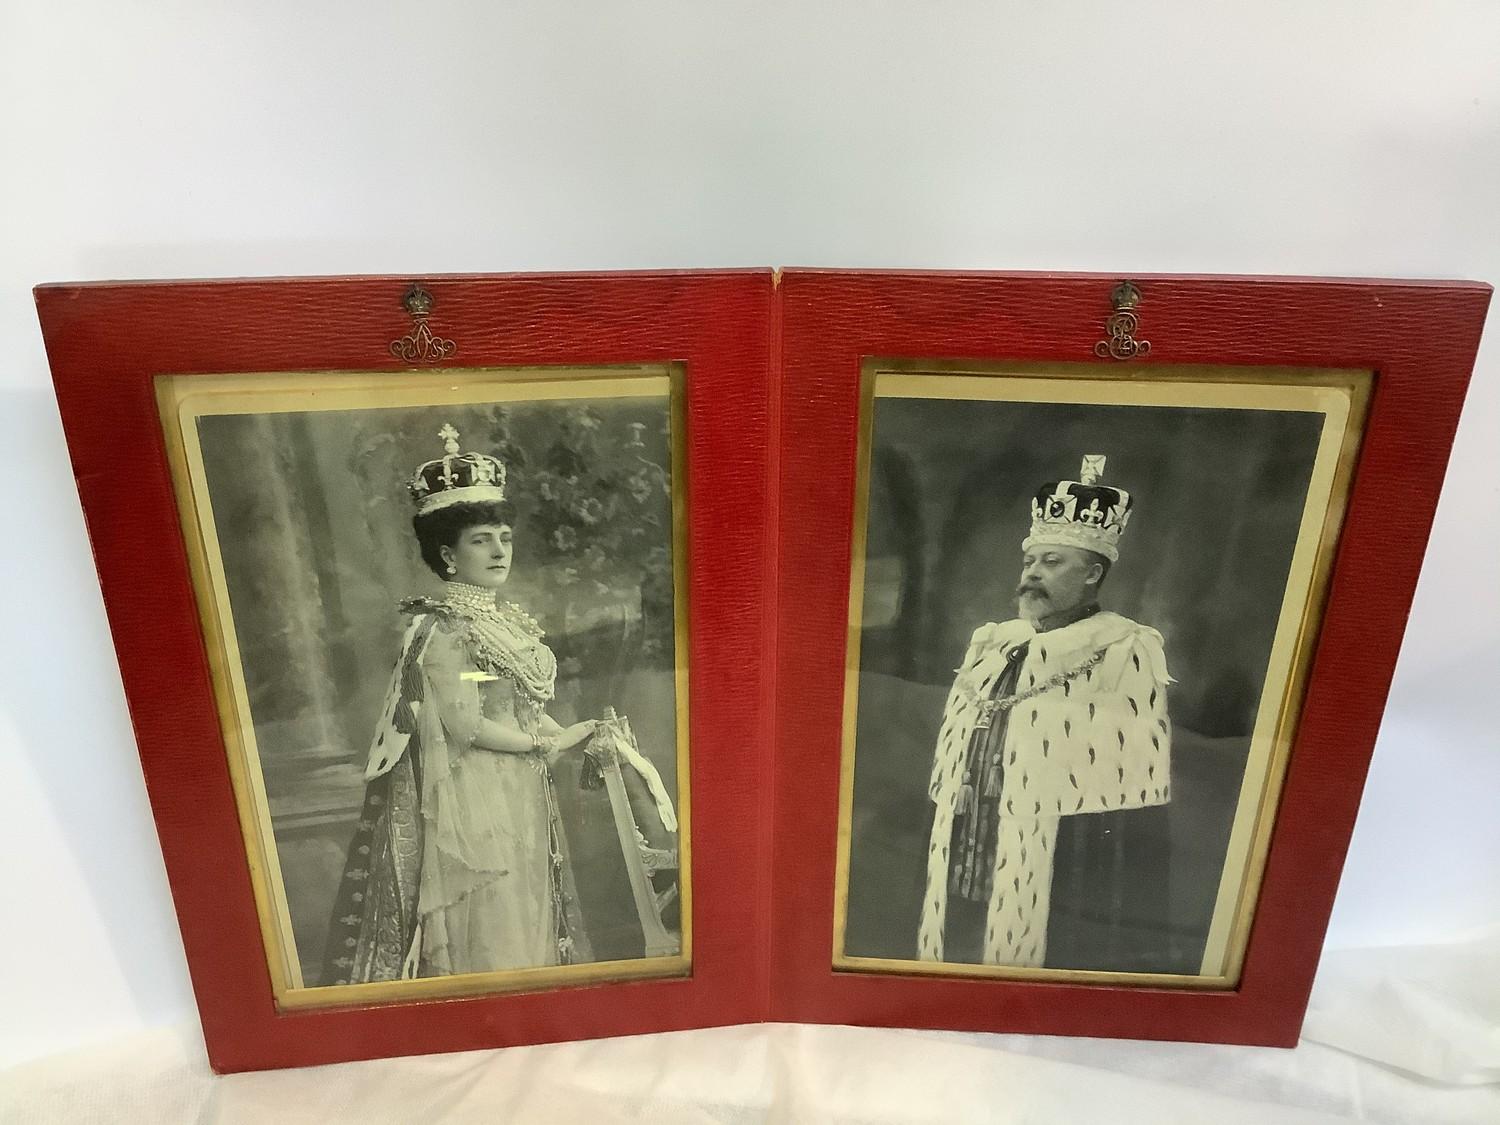 Two Coronation Day monochrome three-quarter length photographs of King Edward VII (1841-1910) and